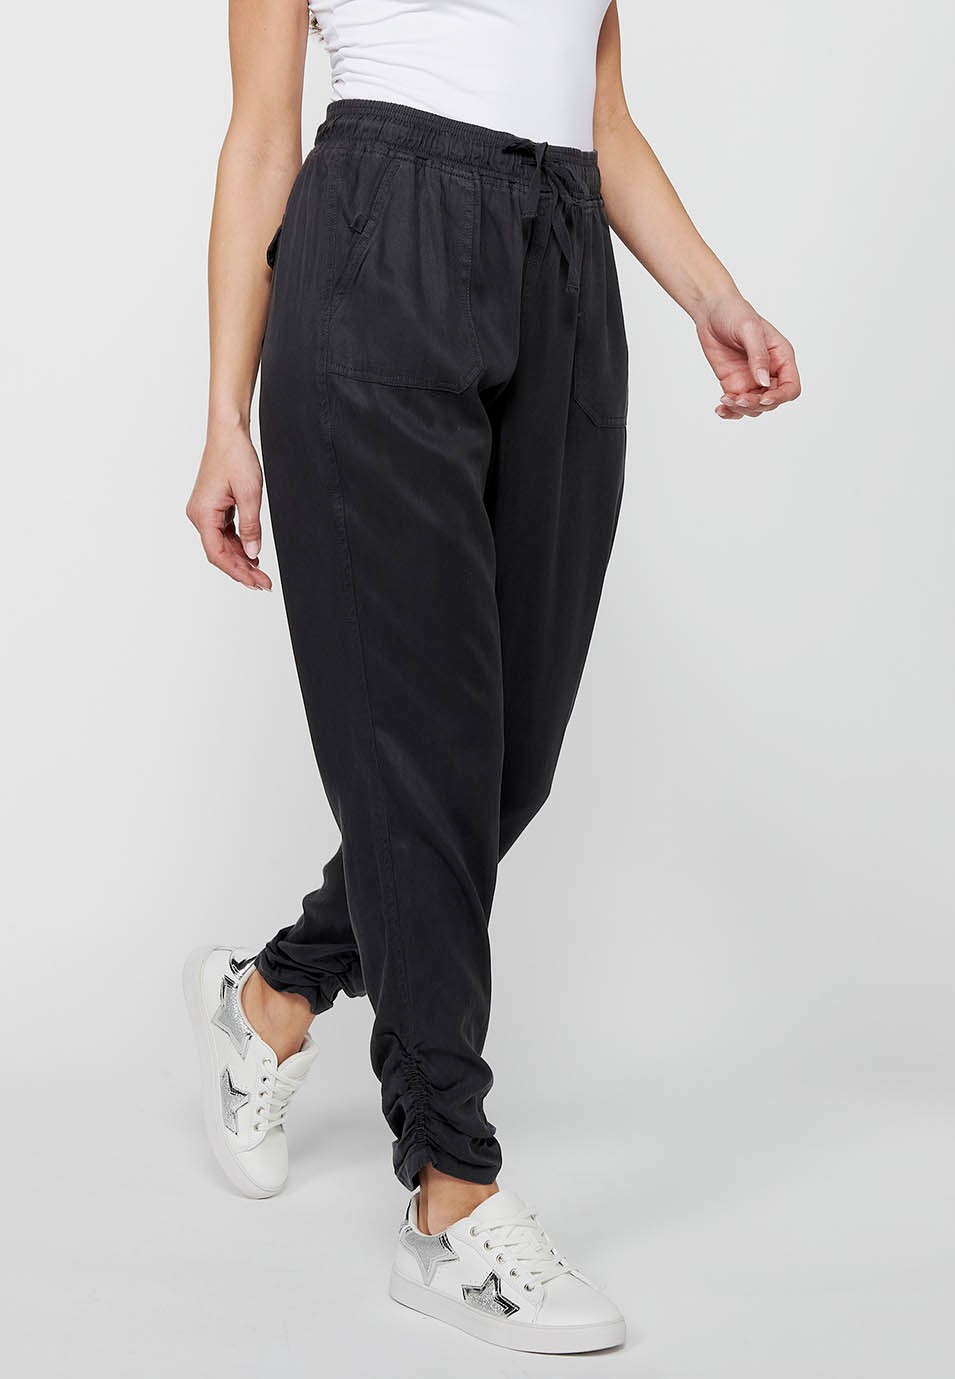 Long jogger pants with curled finish and rubberized waist with four pockets, two at the back with flap in Black for Women 3